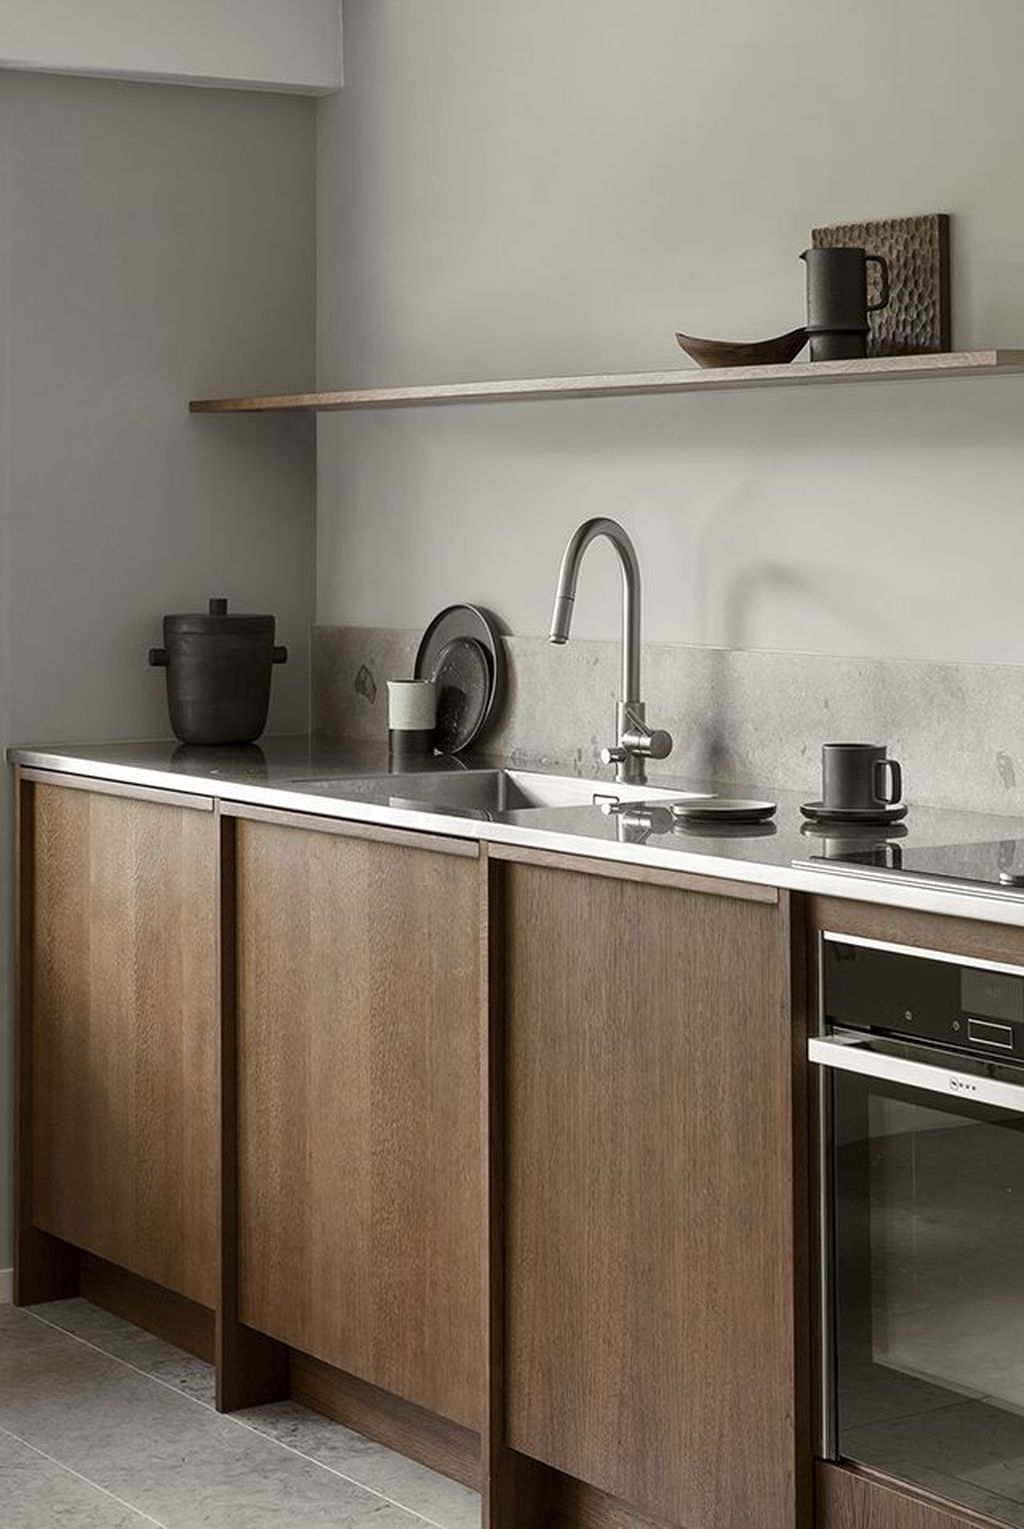 Elegant Minimalist Kitchen Design Ideas For Small Space To Try 03